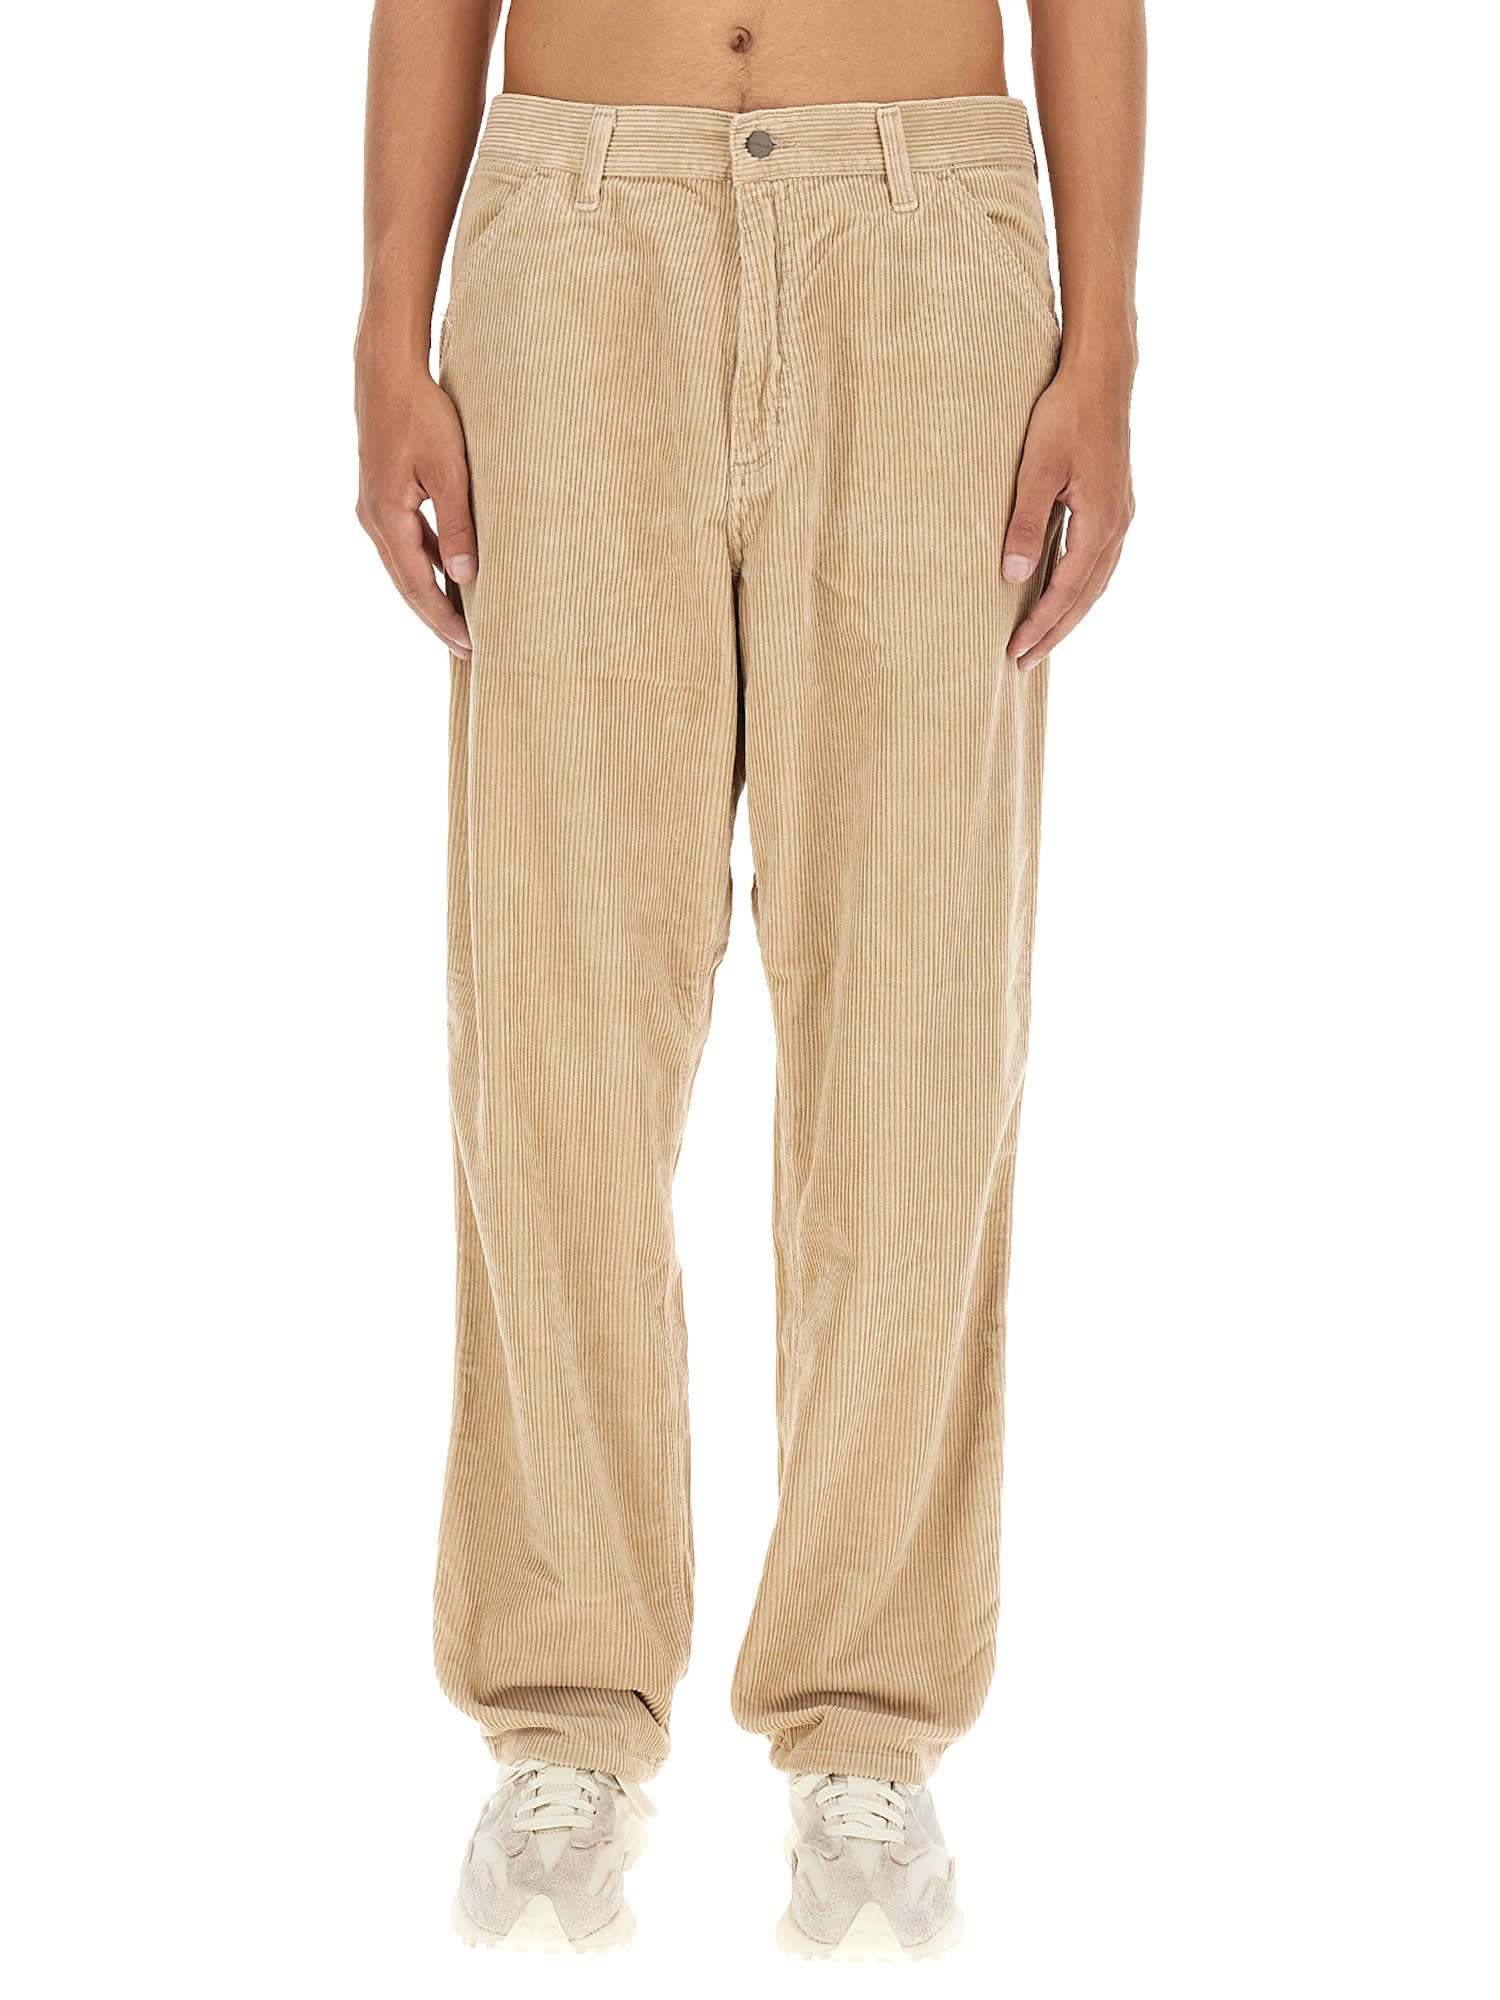 CARHARTT COVENTRY PANTS